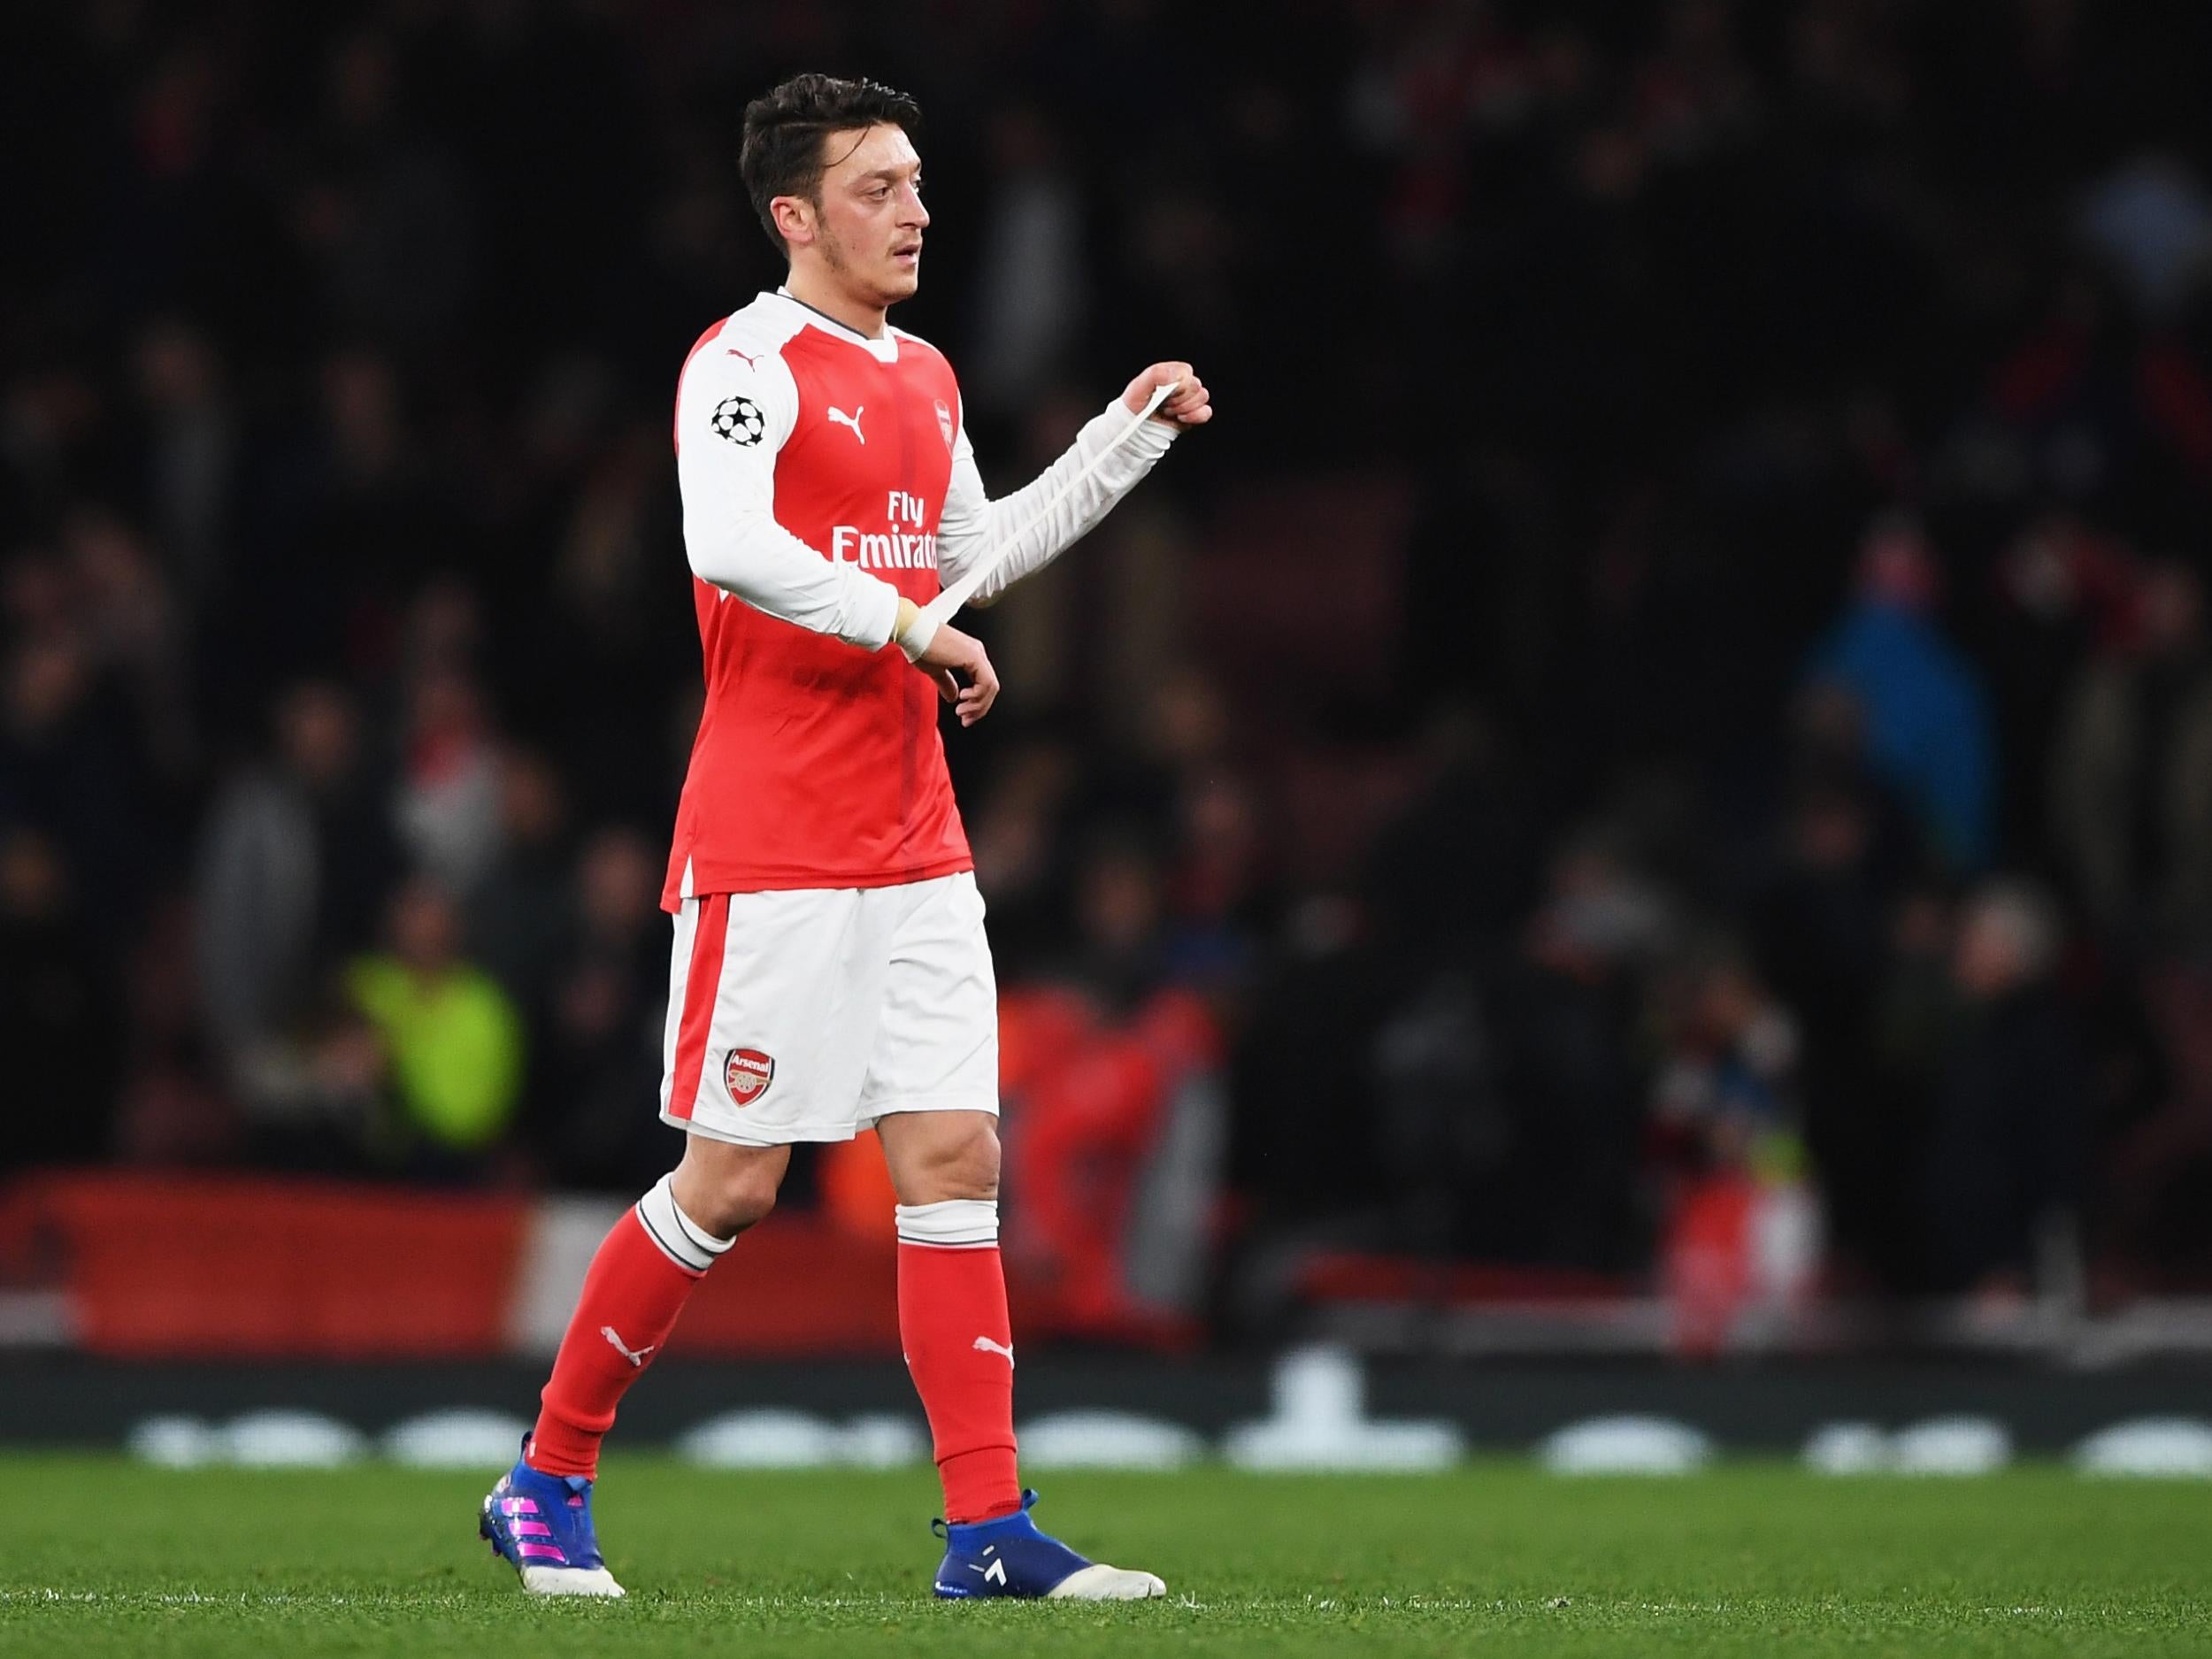 Ozil admitted his performances weren't good enough in the Champions League